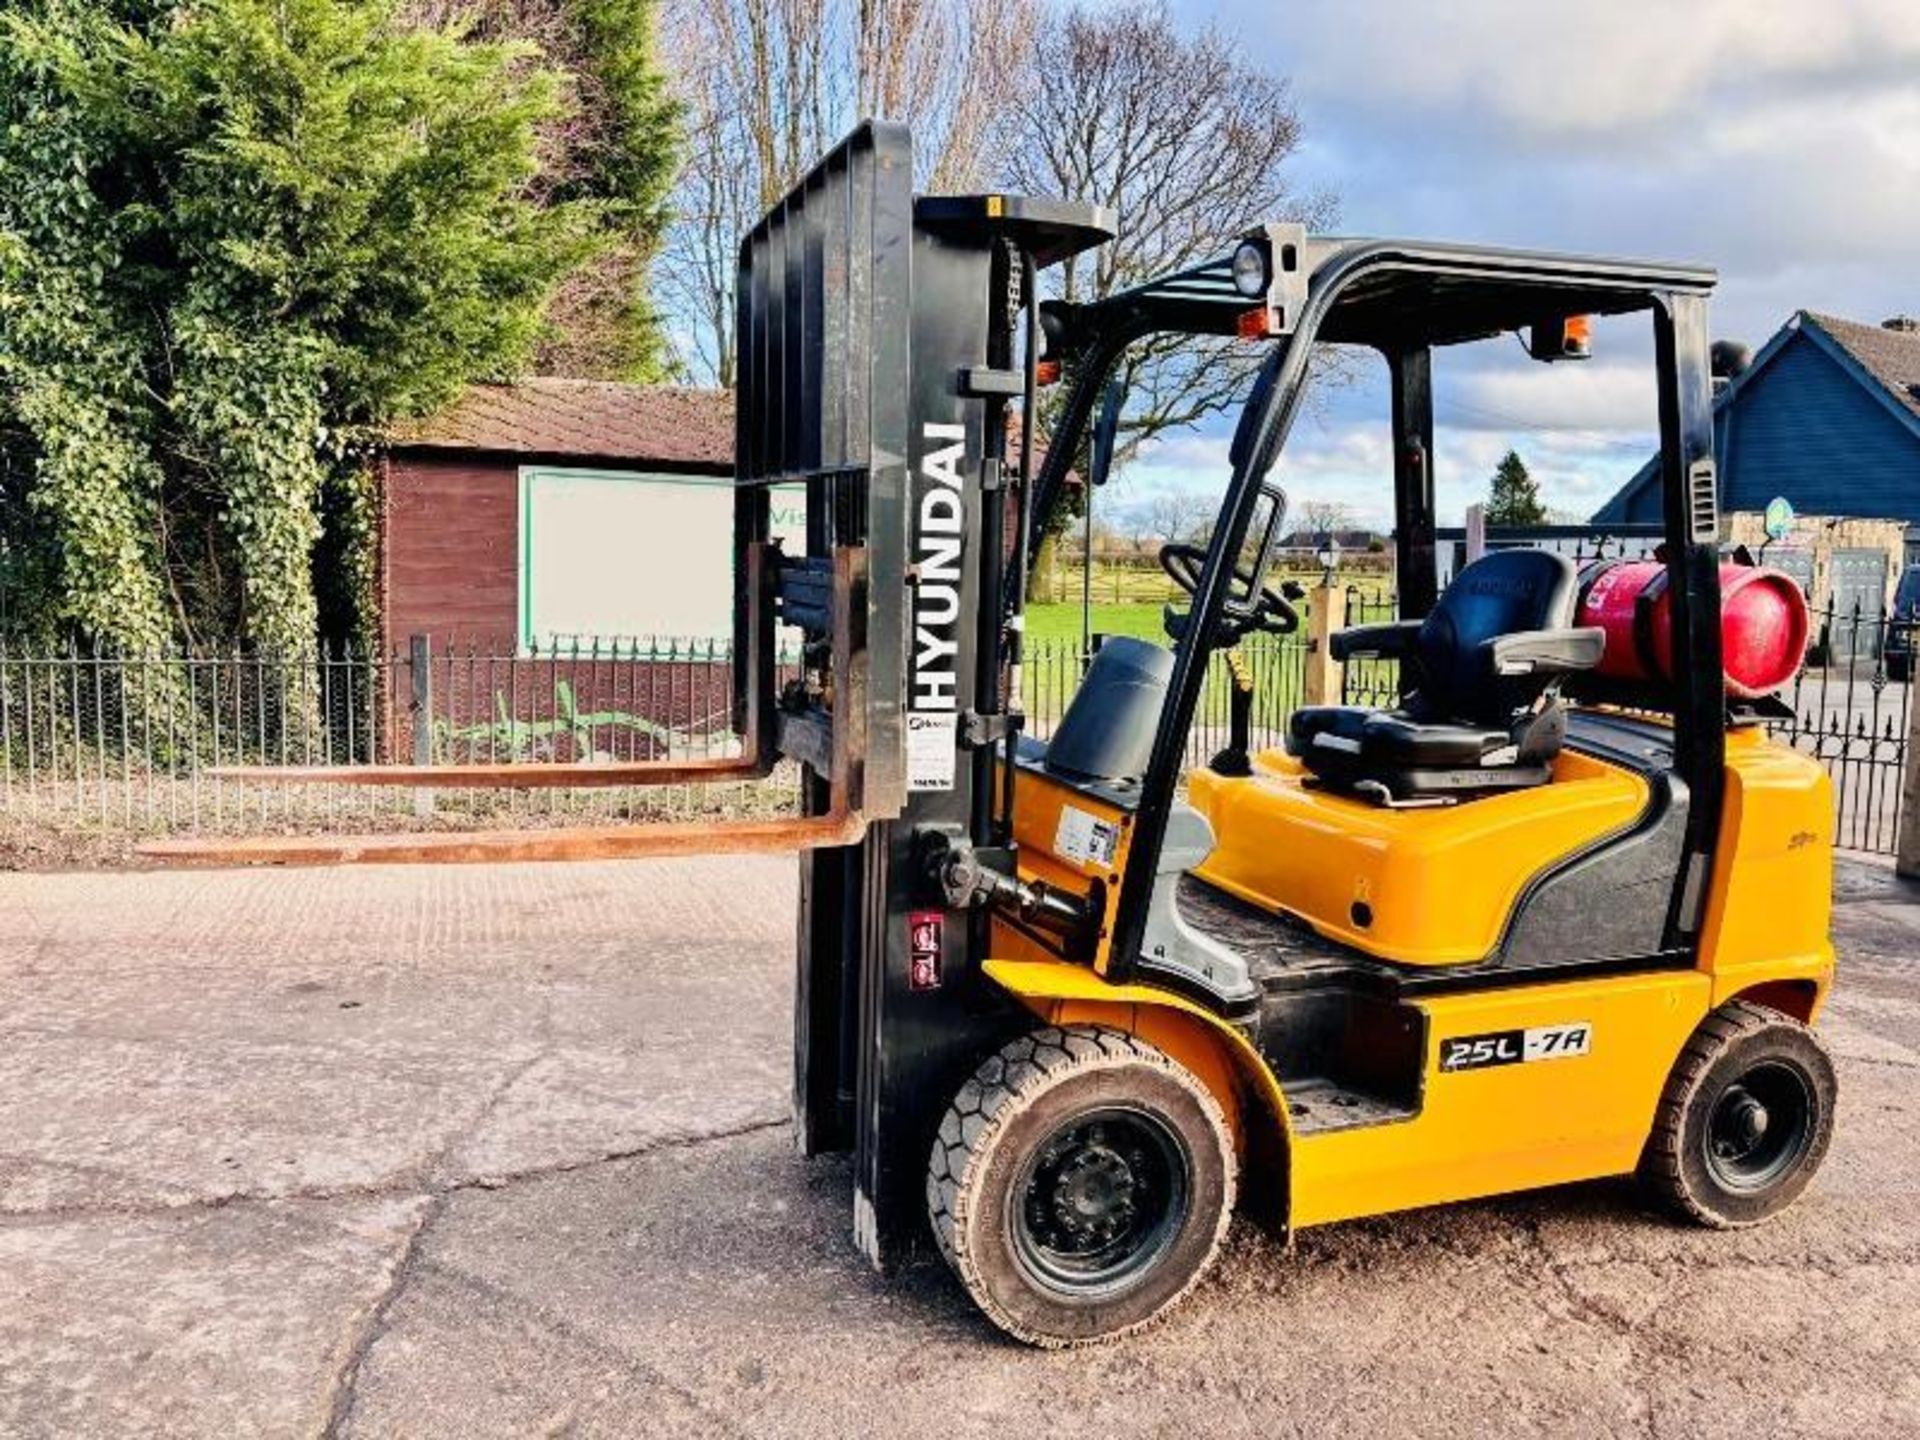 HYUNDAI 25L-7A CONTAINER SPEC FORKLIFT *YEAR 2018, 2172 HOURS* C/W SIDE SHIFT